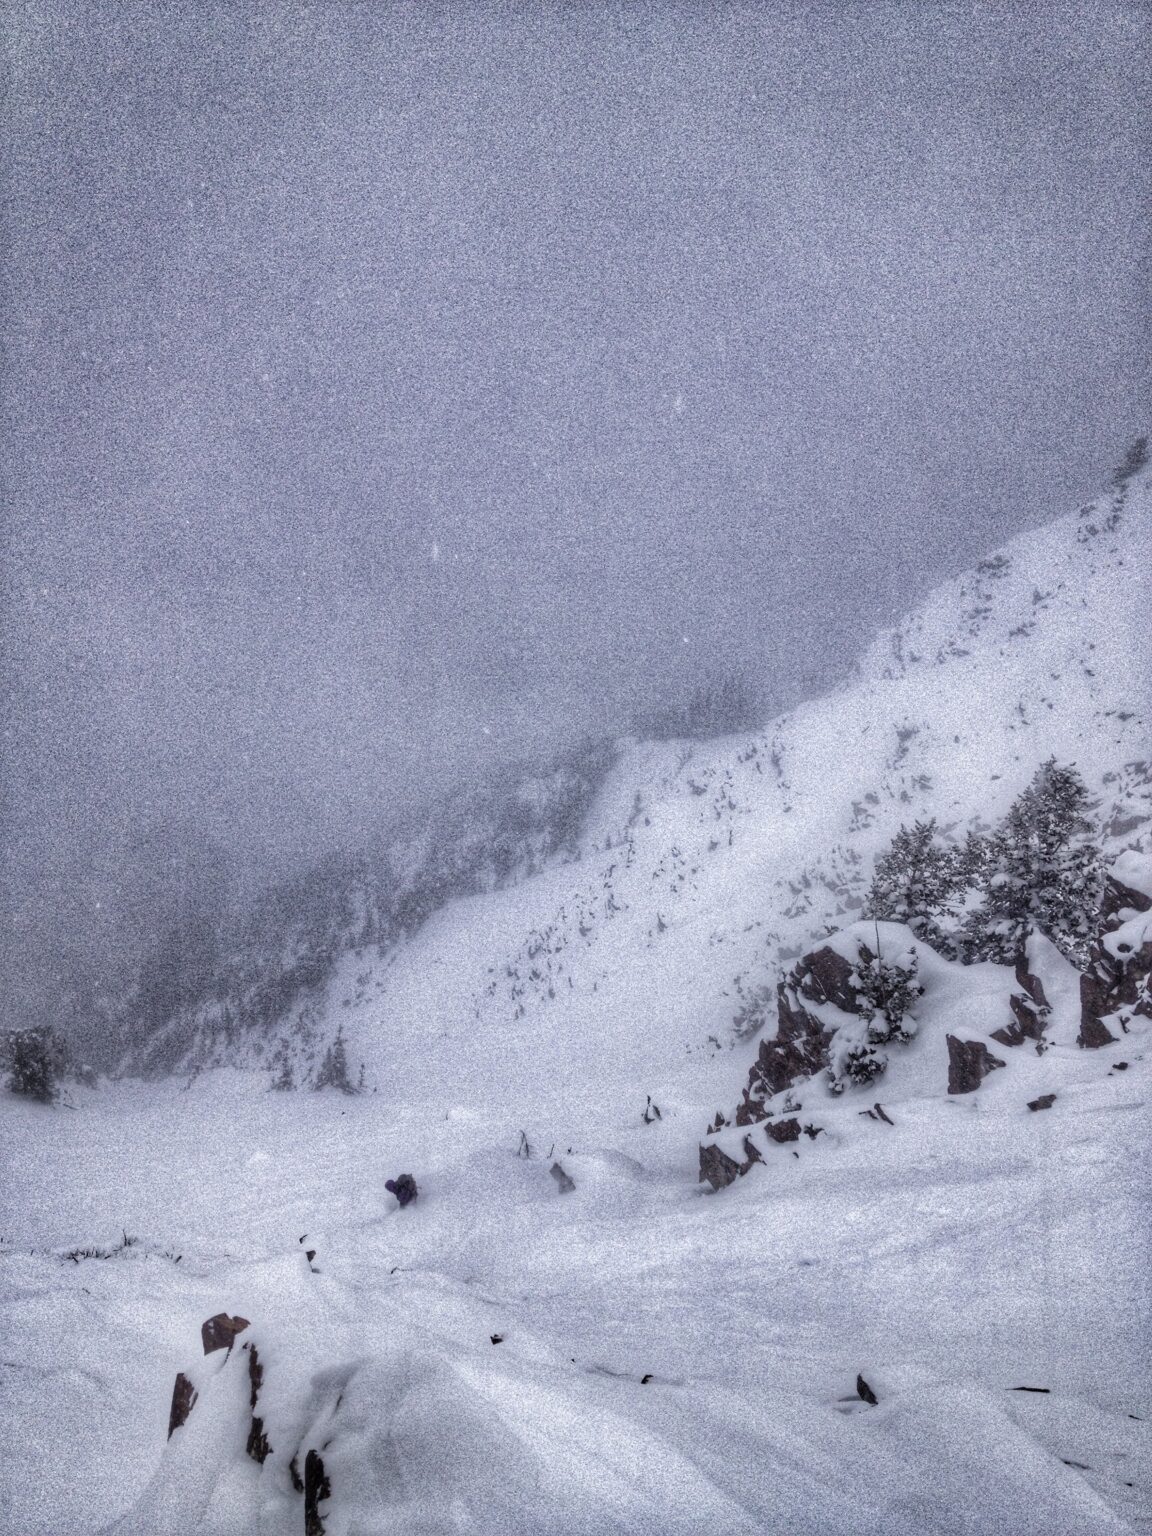 Looking down the White Pine chute towards Little Cottonwood Canyon in the Wasatch Backcountry